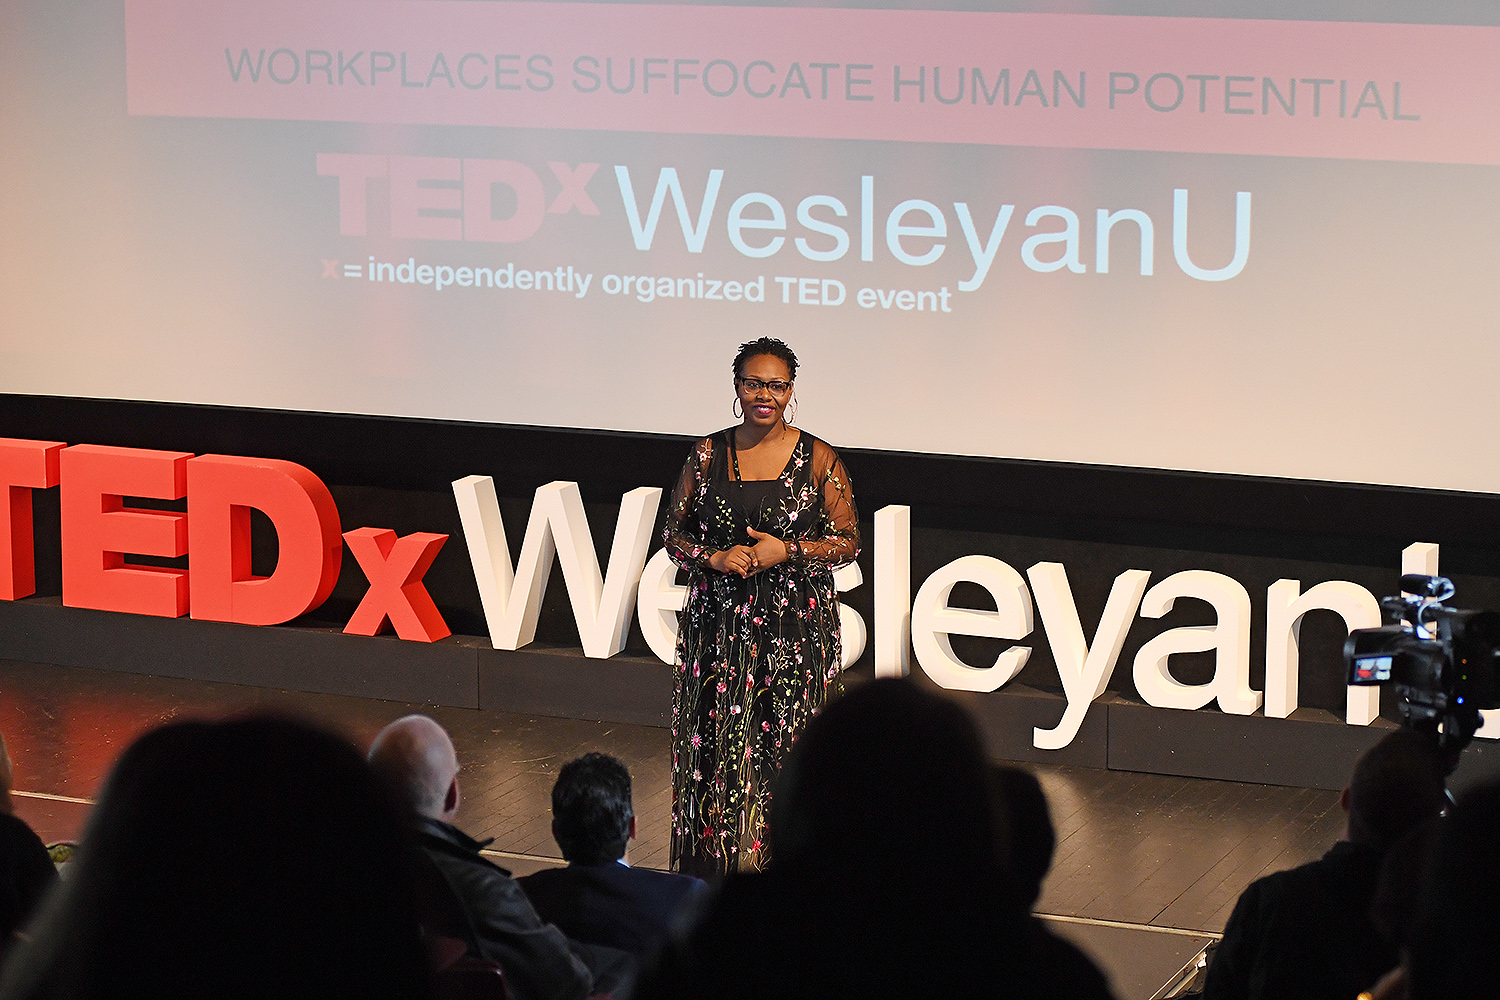 Sallomé Hralima '02, director at The Future Project, spoke on "Workplaces Suffocate Human Potential."